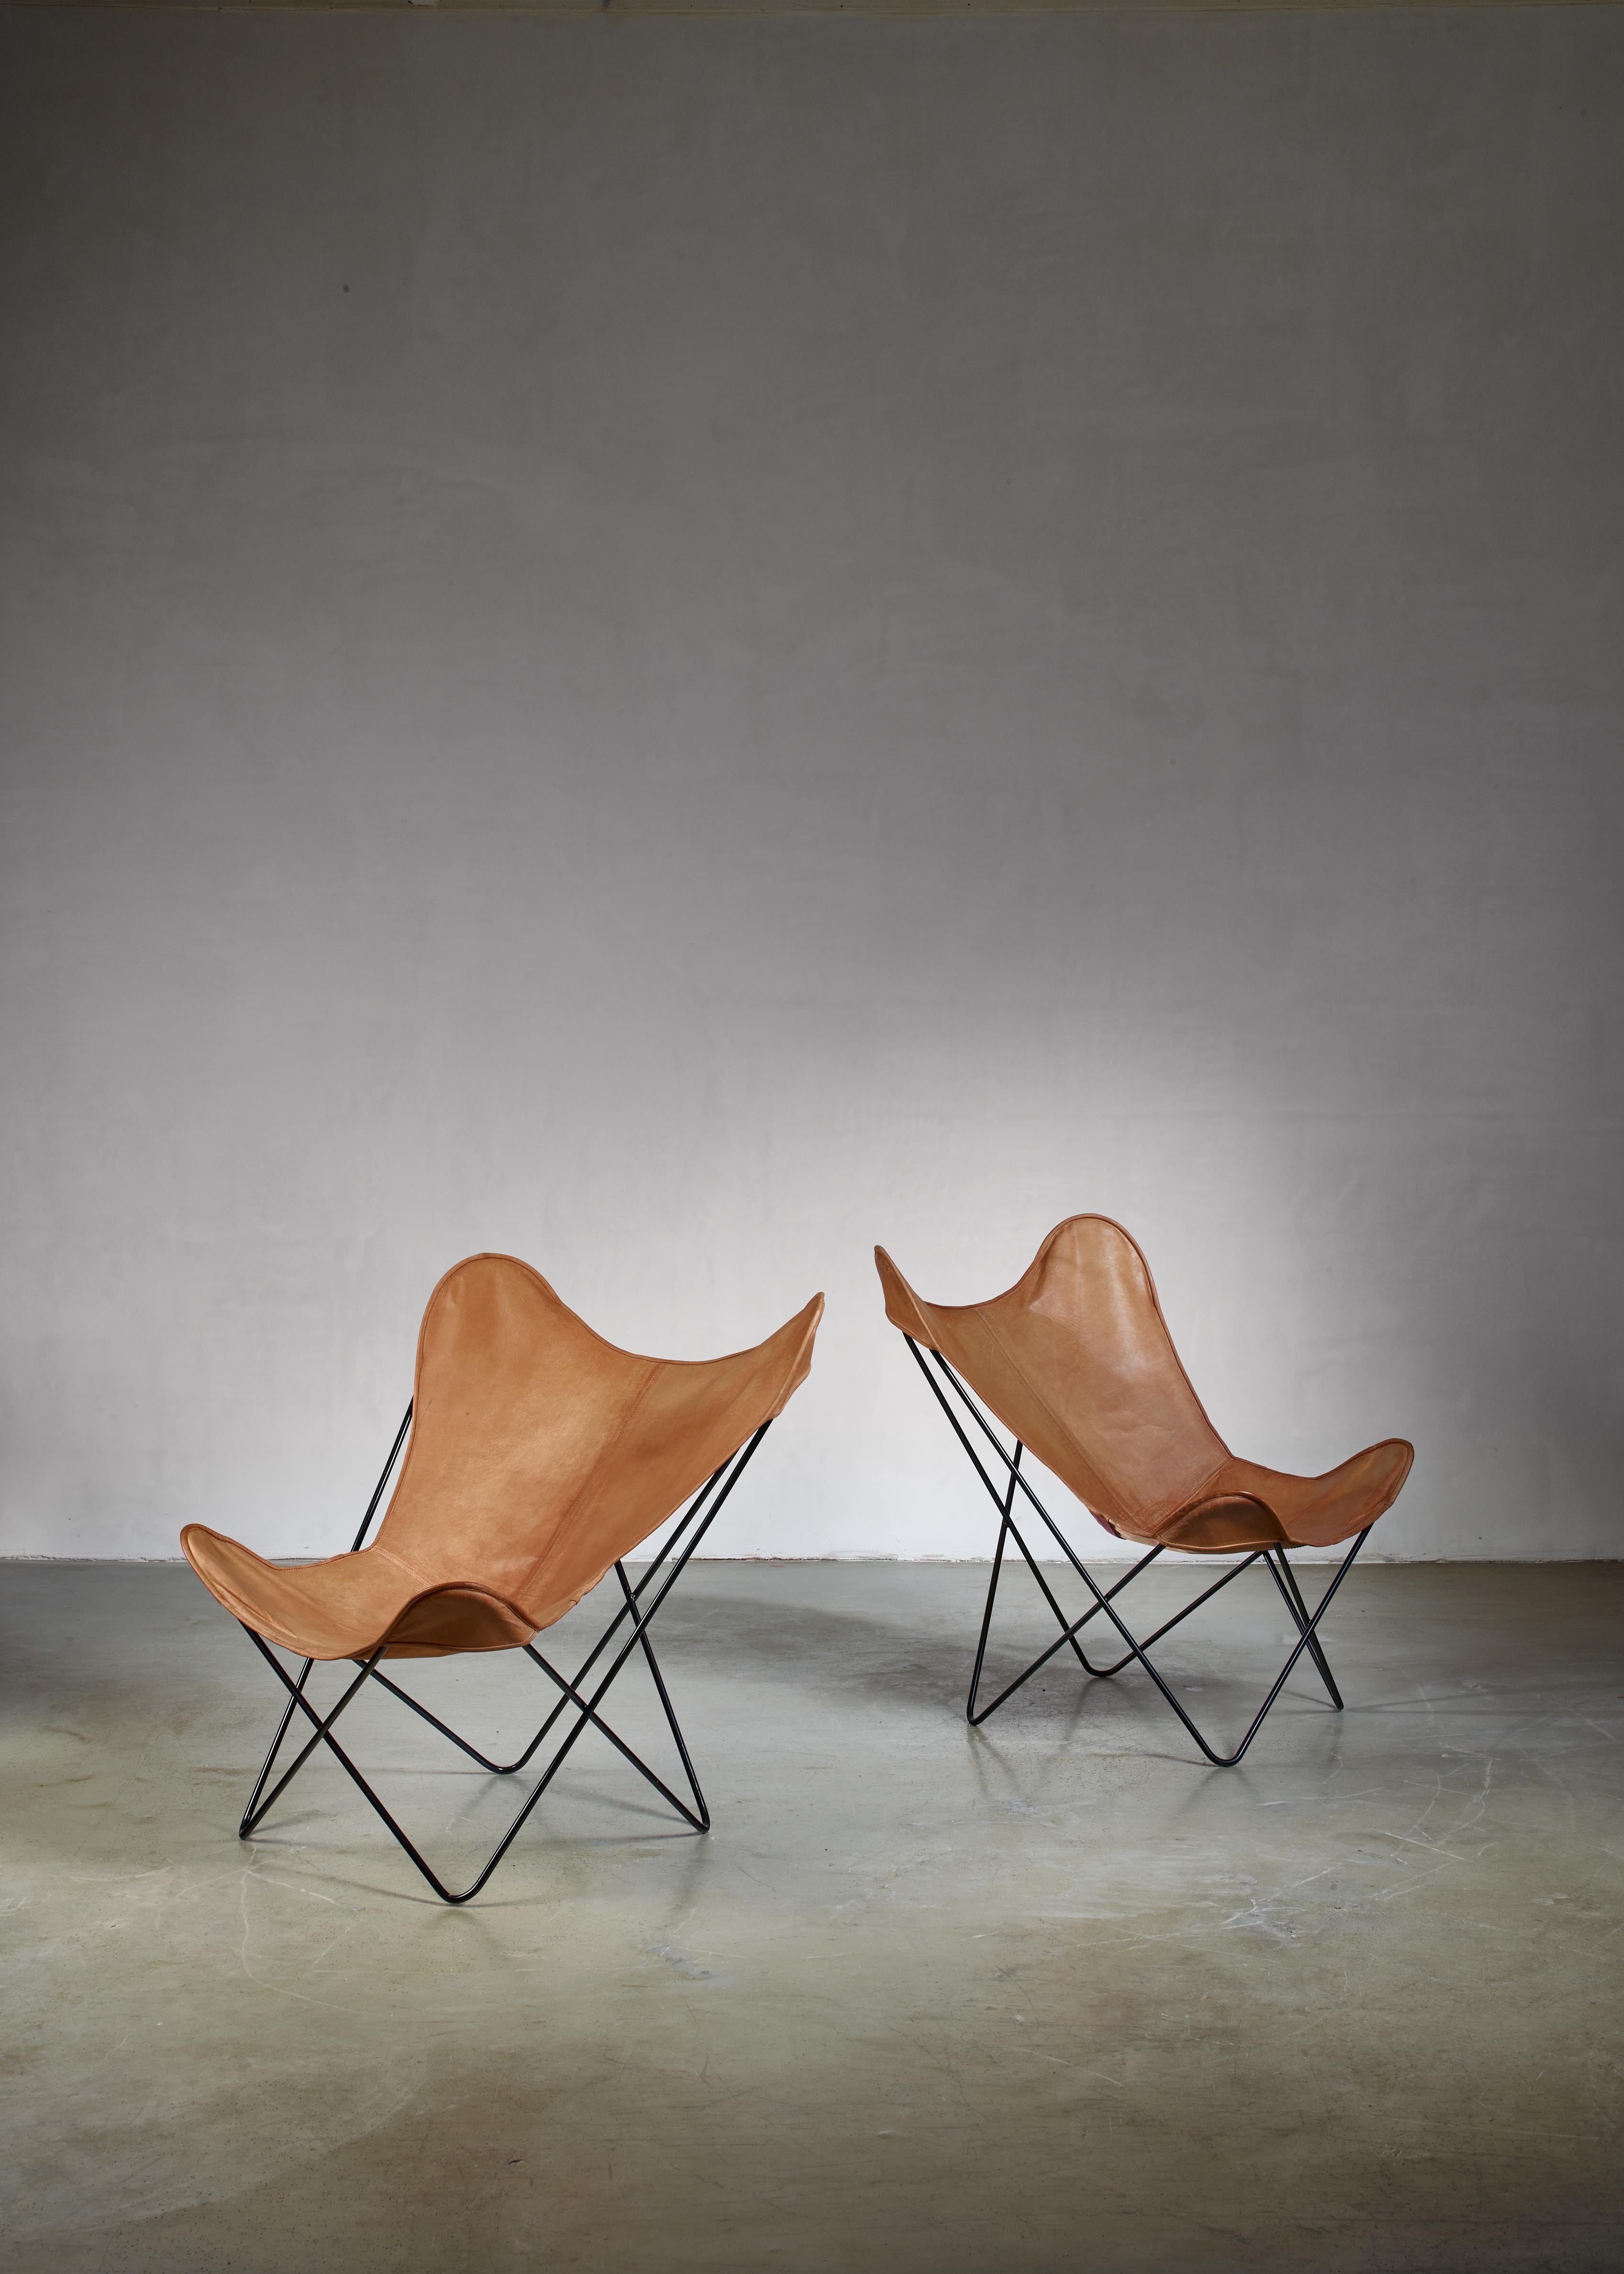 A pair of Knoll butterfly chairs, designed in 1938 by Antonio Bonet, Juan Kurchan and Jorge Ferrari-Hardoy. The chairs have a thin, black lacquered metal frame with a tan leather sling seating with a beautiful mild patina.

Both chairs are in